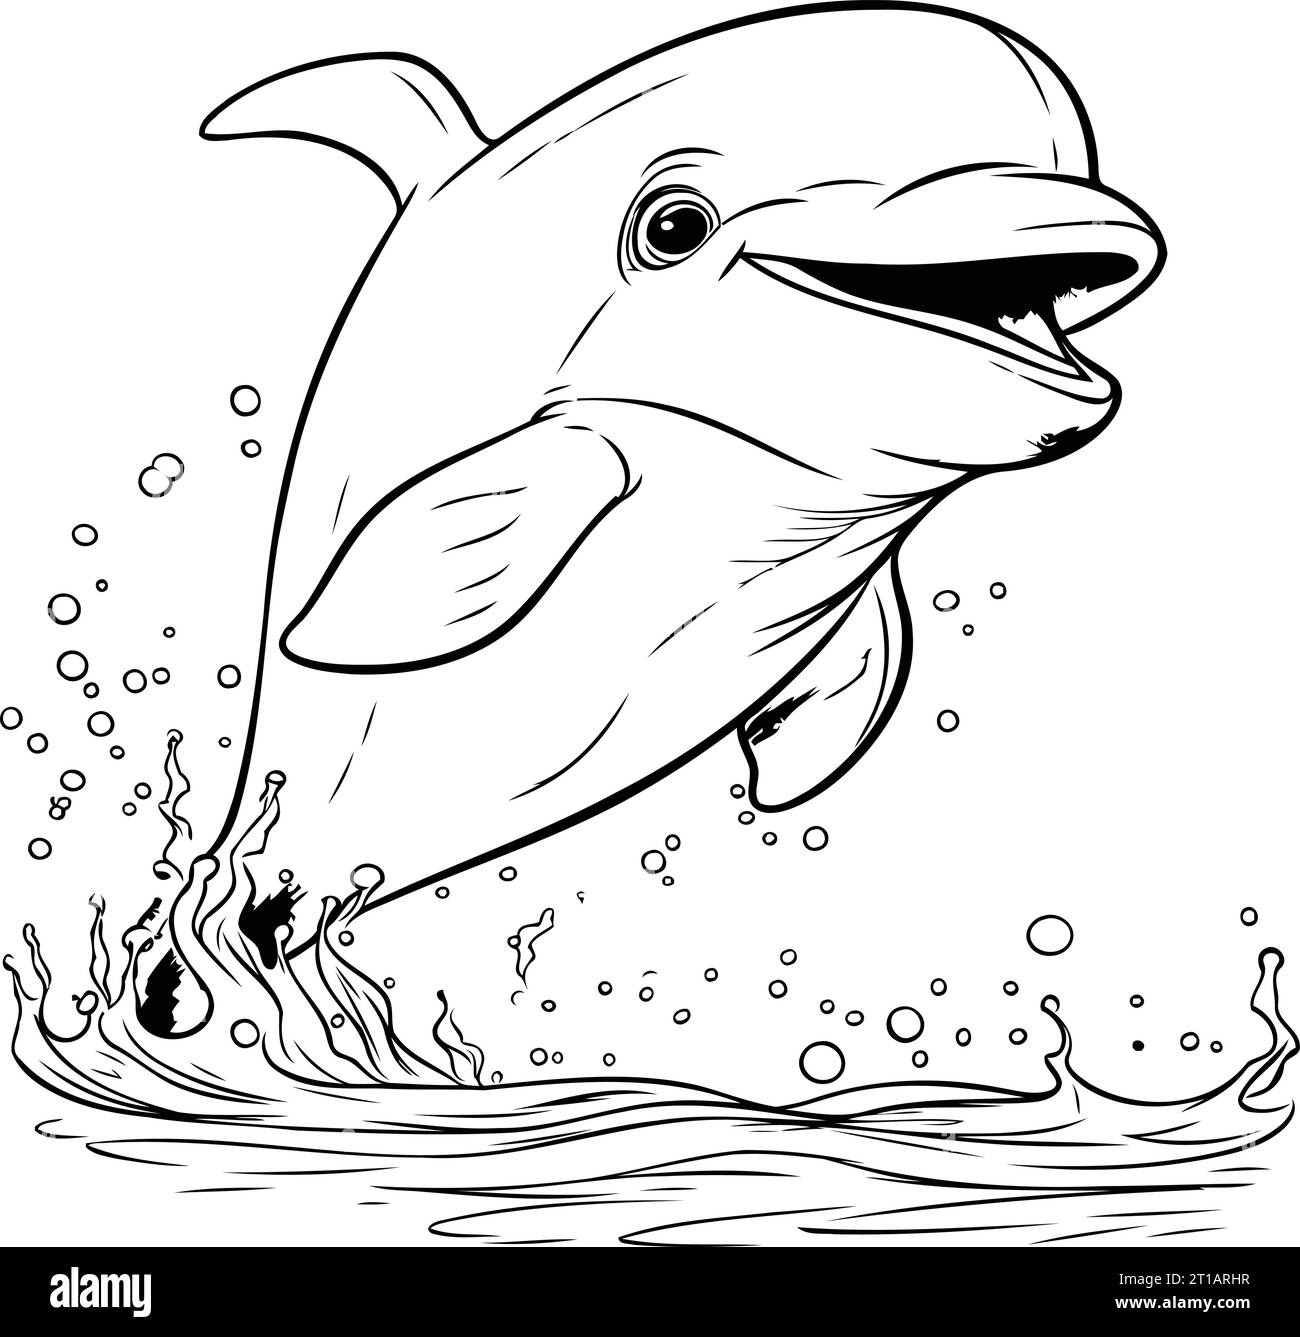 Dolphin Jumping Out Of The Water Vector Illustration Black And White